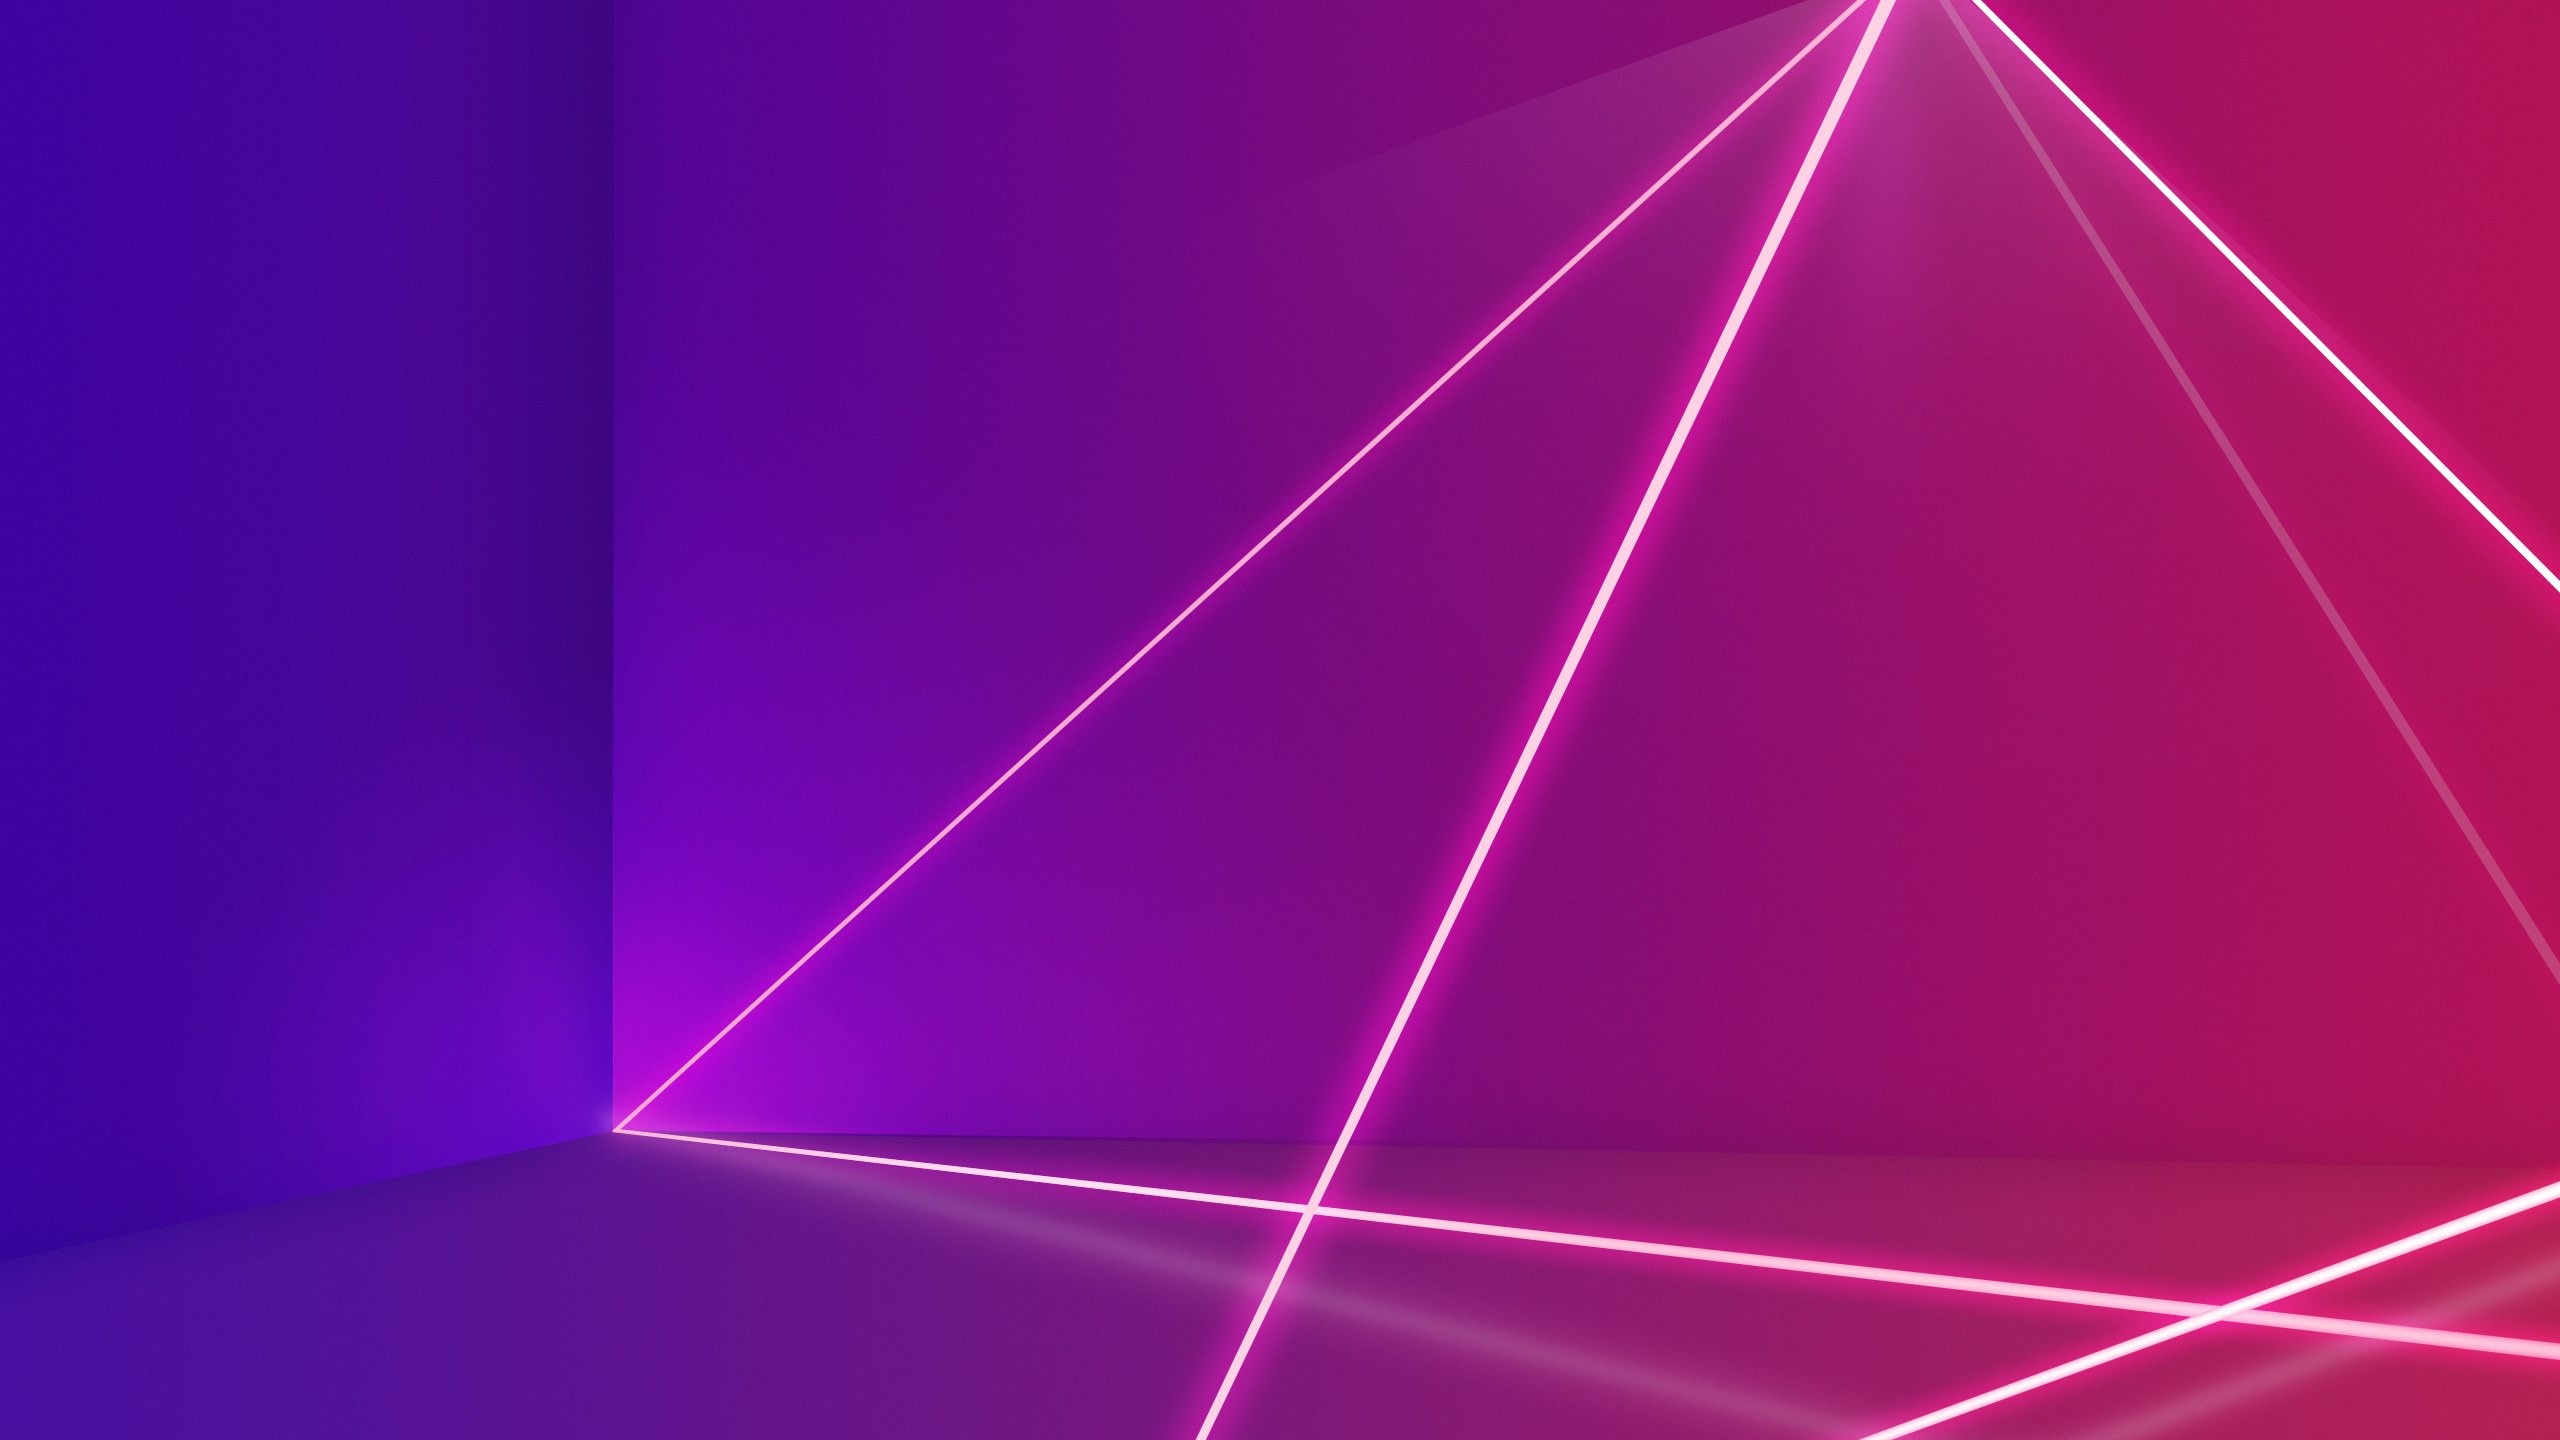 General 2560x1440 lines abstract retrowave colorful digital art pink purple